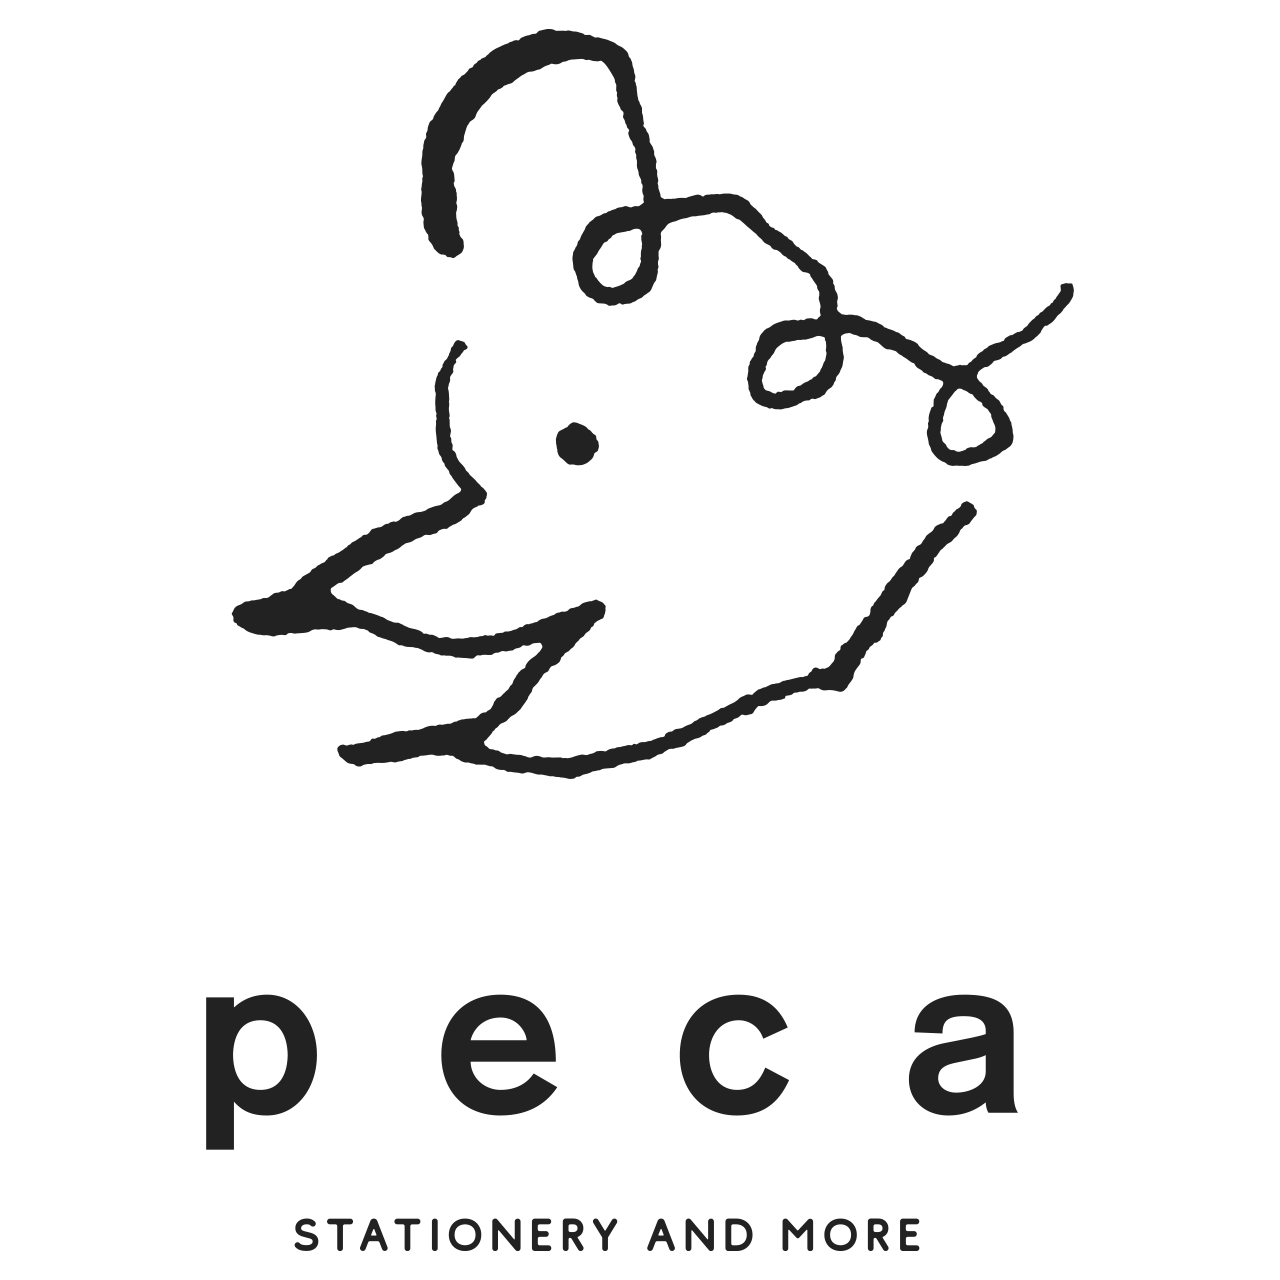 peca stationery and more